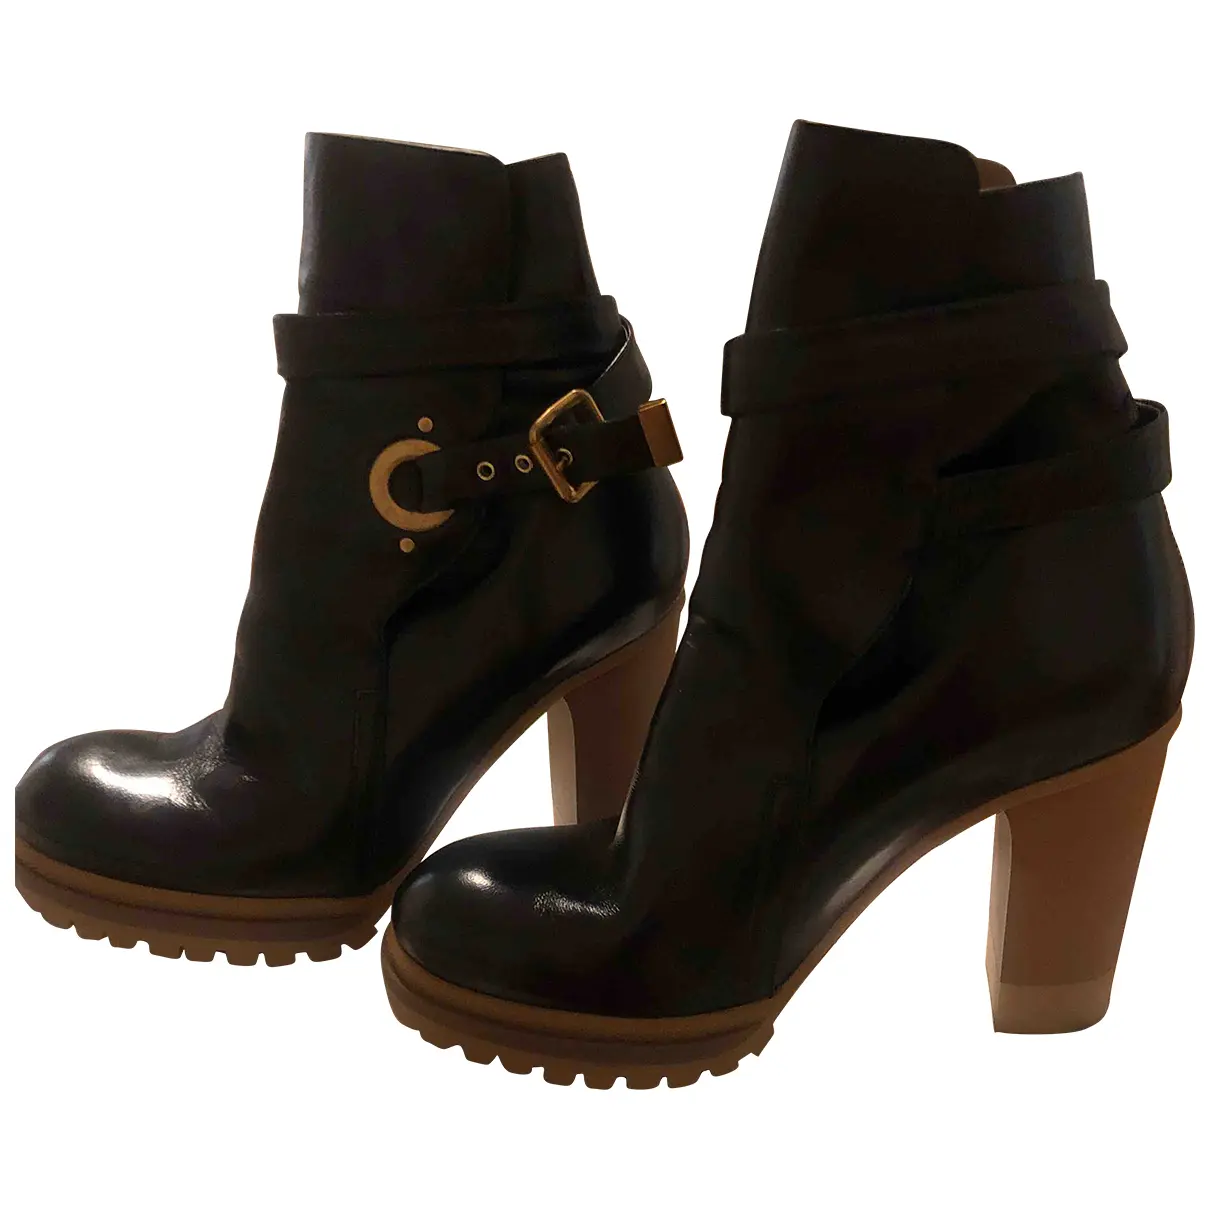 Leather buckled boots Chloé